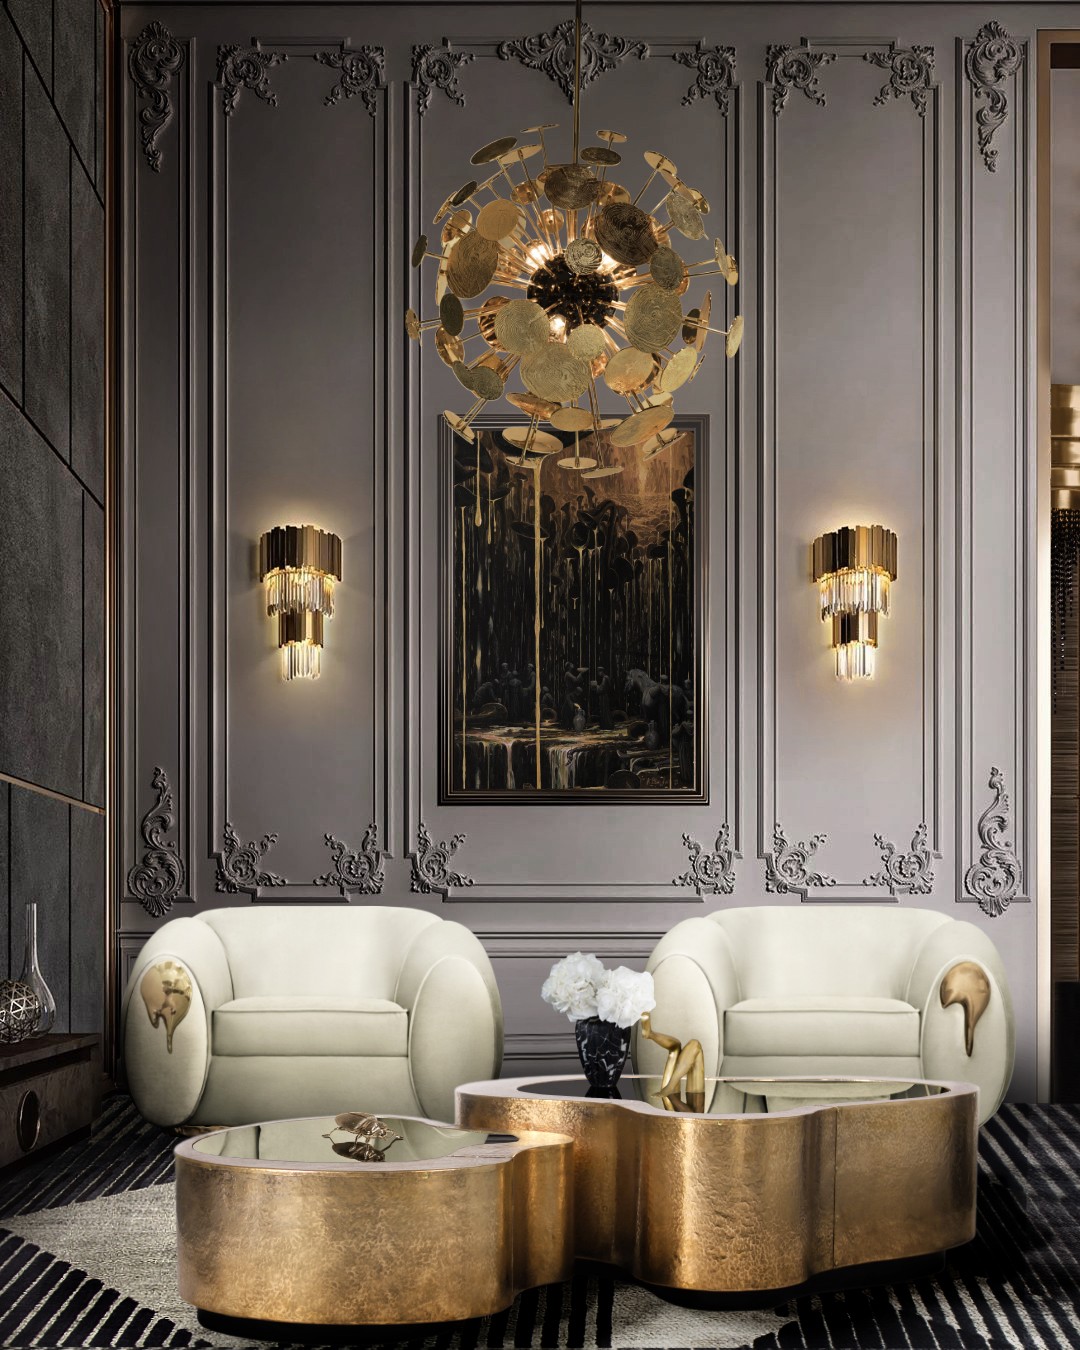 Get Inspired By The Most Elegant Ambiances Selected By PullCast